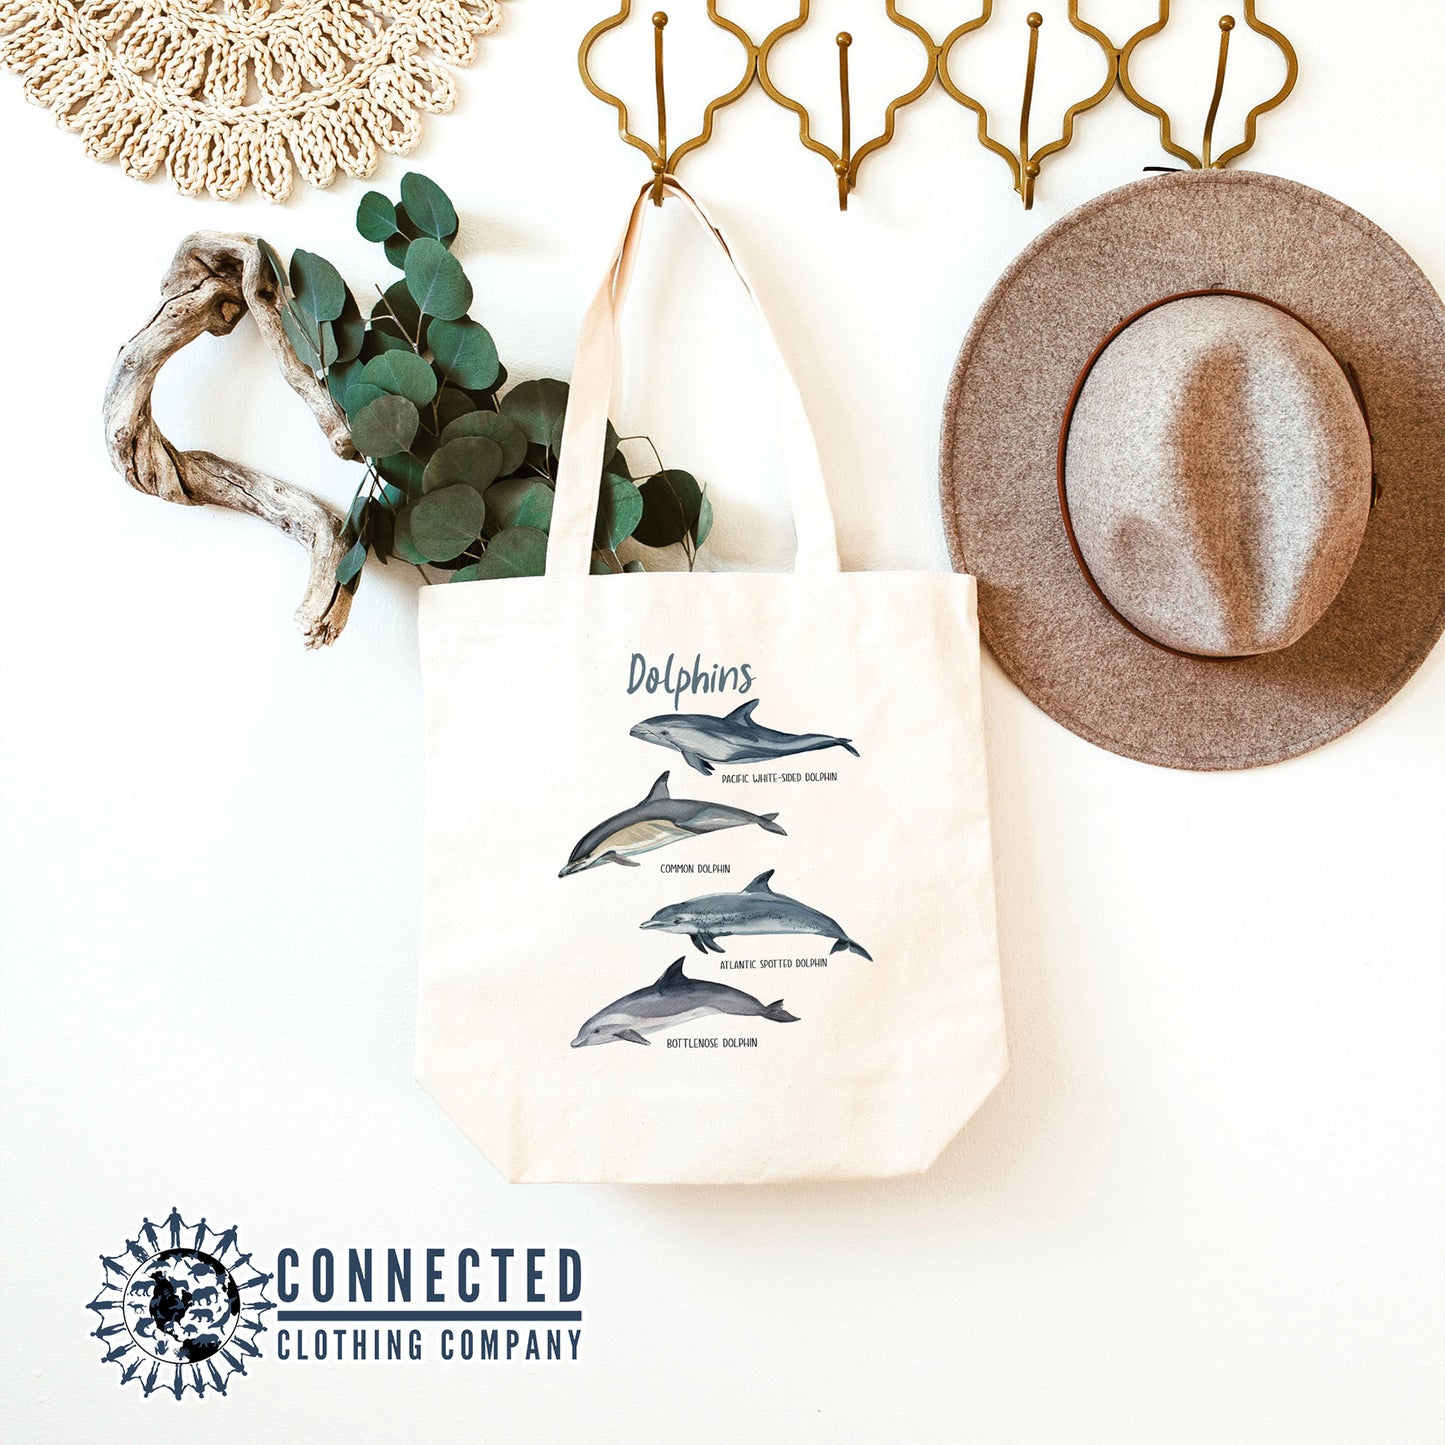 Dolphin Watercolor Tote Bag - sweetsherriloudesigns - 10% of proceeds donated to ocean conservation